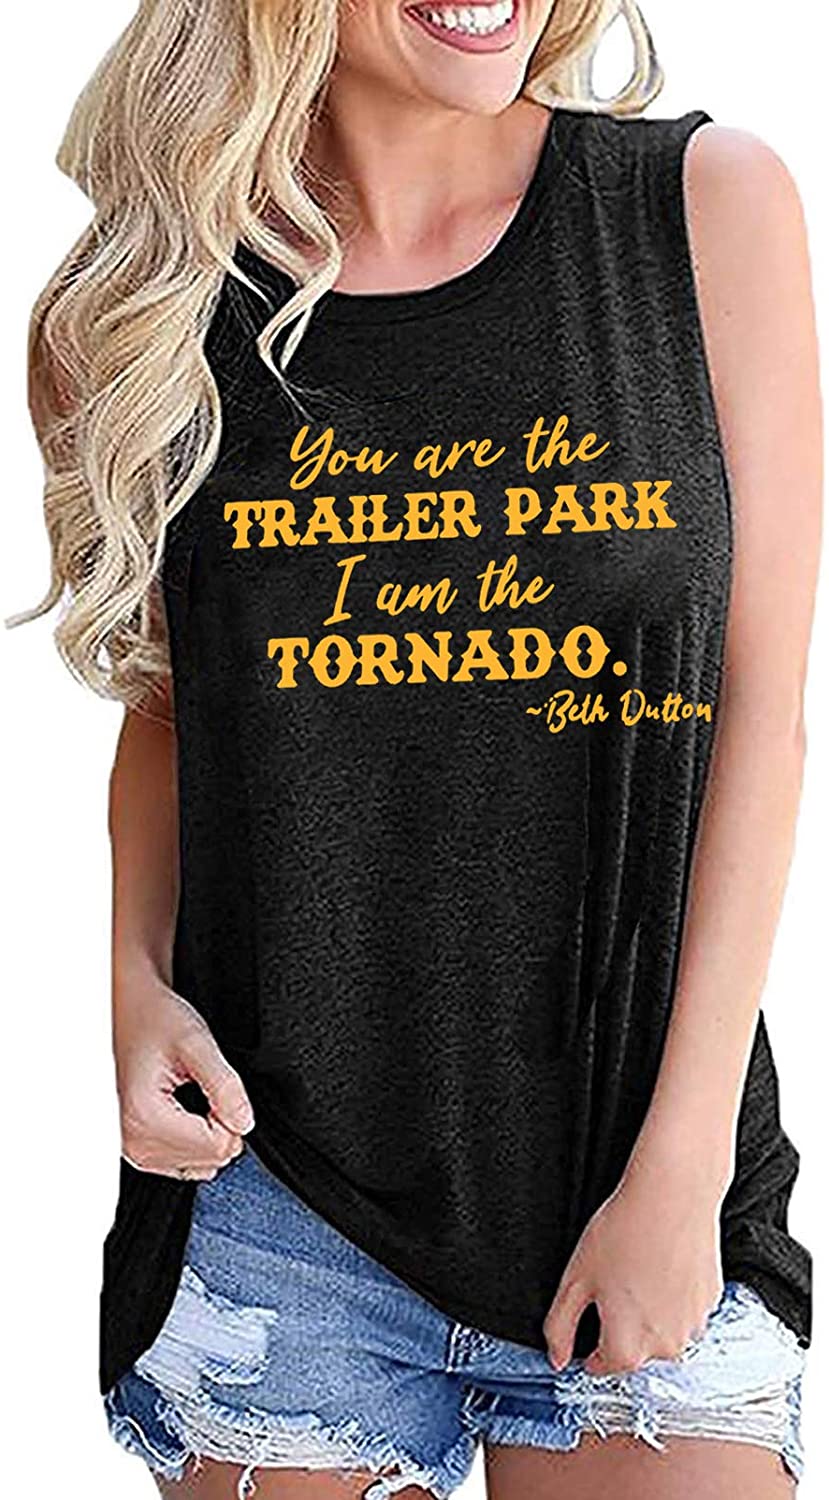 Beth Dutton Tank Tops for Women Vintage Funny Summer Casual Muscle T-Shirt  Retro | eBay